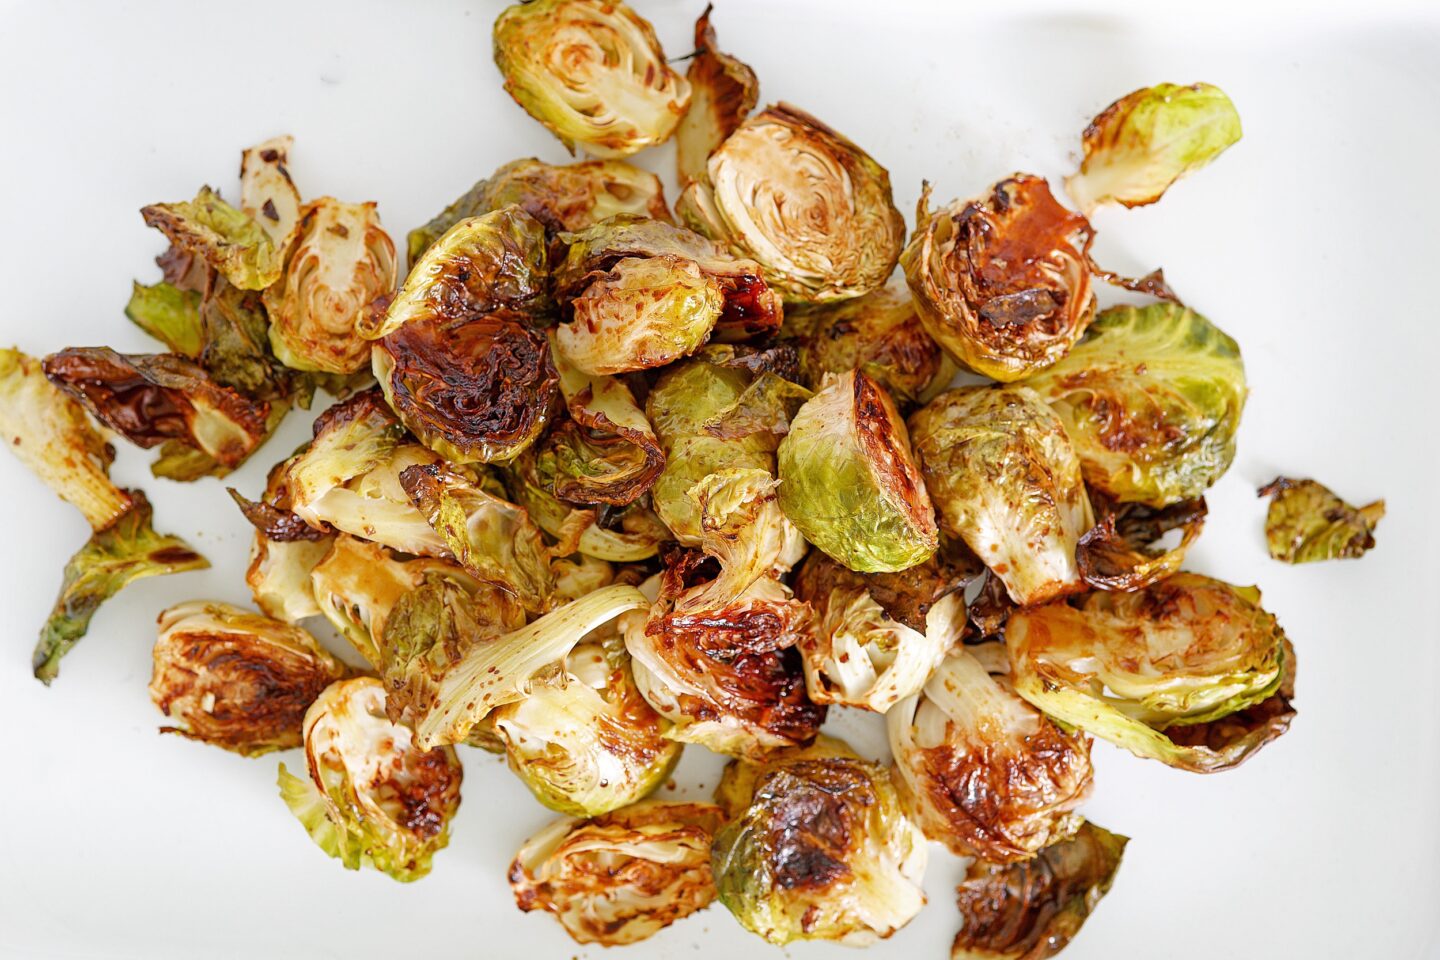 Roasted-Garlic-Balsamic-Brussels-Sprouts-finished